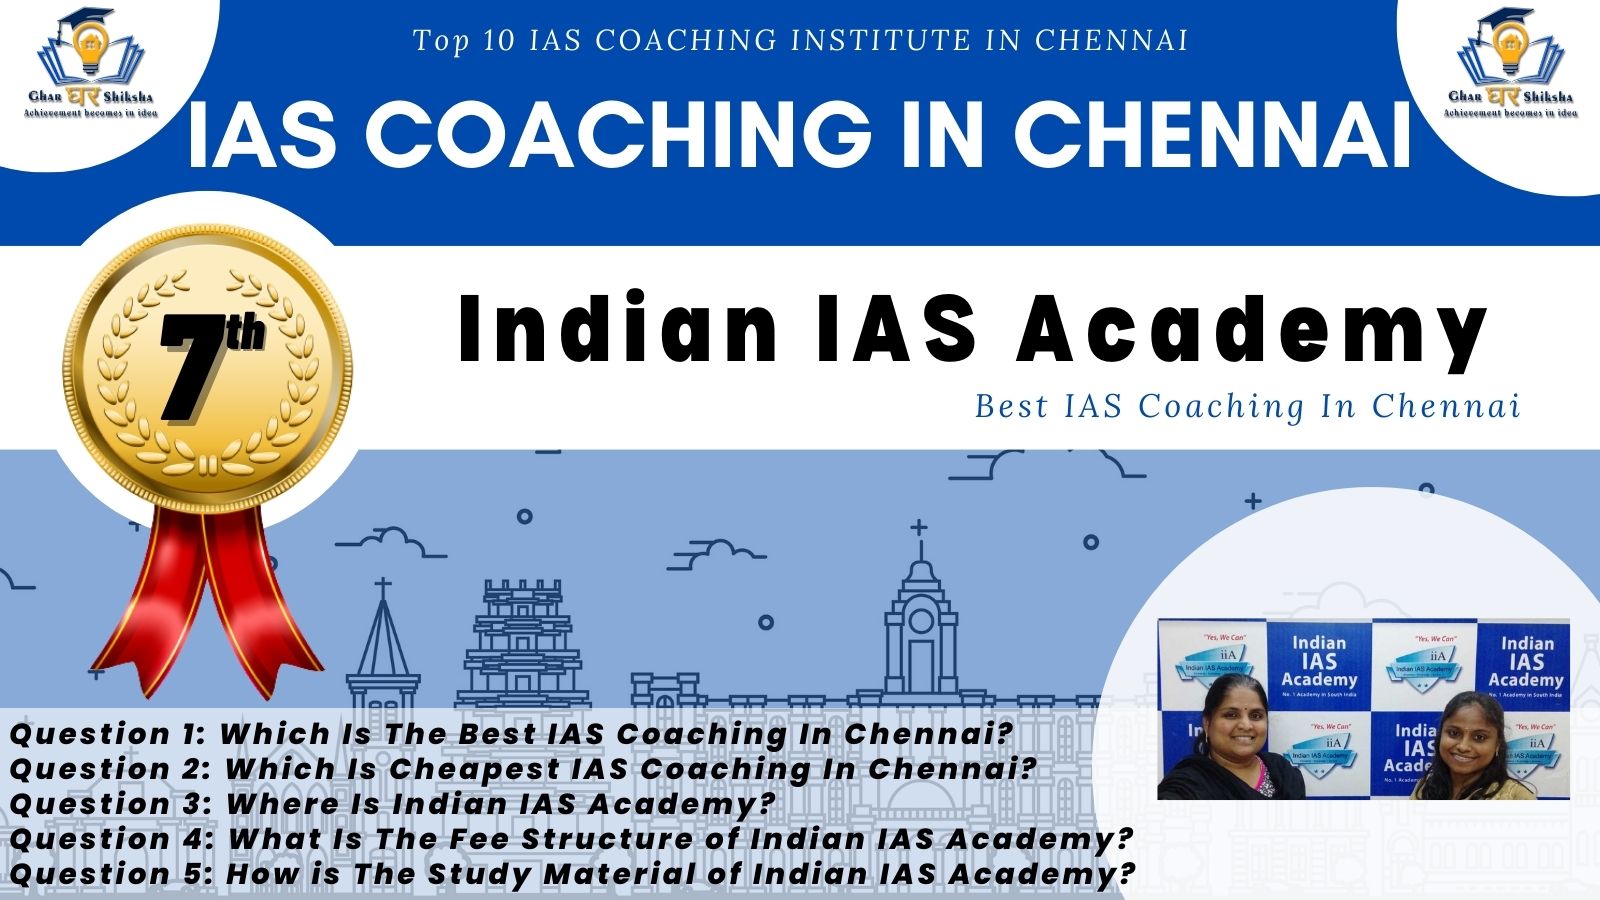 Indian IAS Academy Best IAS Coaching Institute In Chennai